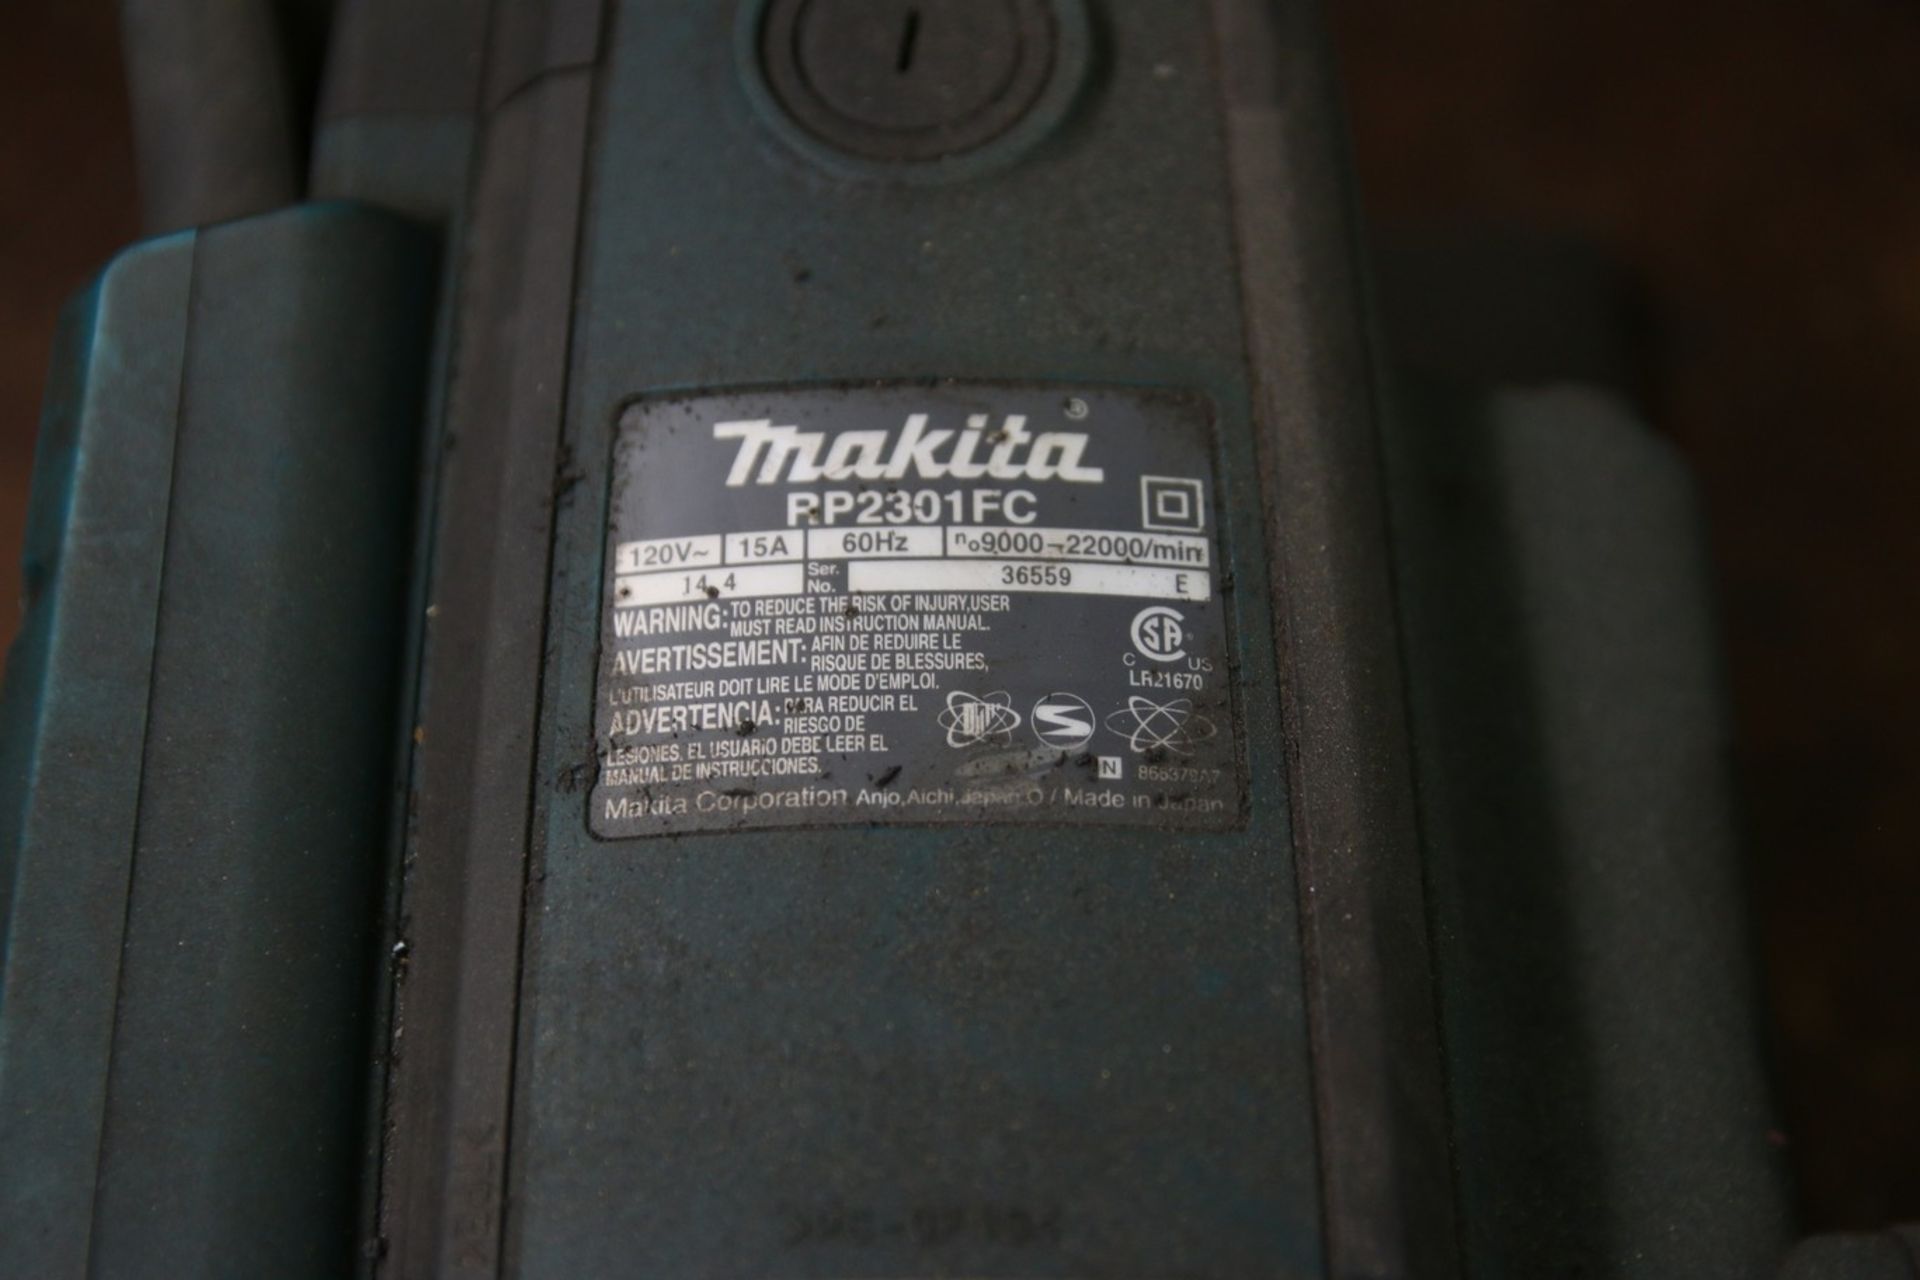 Makita RP2301FC Makita RP2301FC Plunge Router 3 1/4 HP, Variable Speed - Image 3 of 3